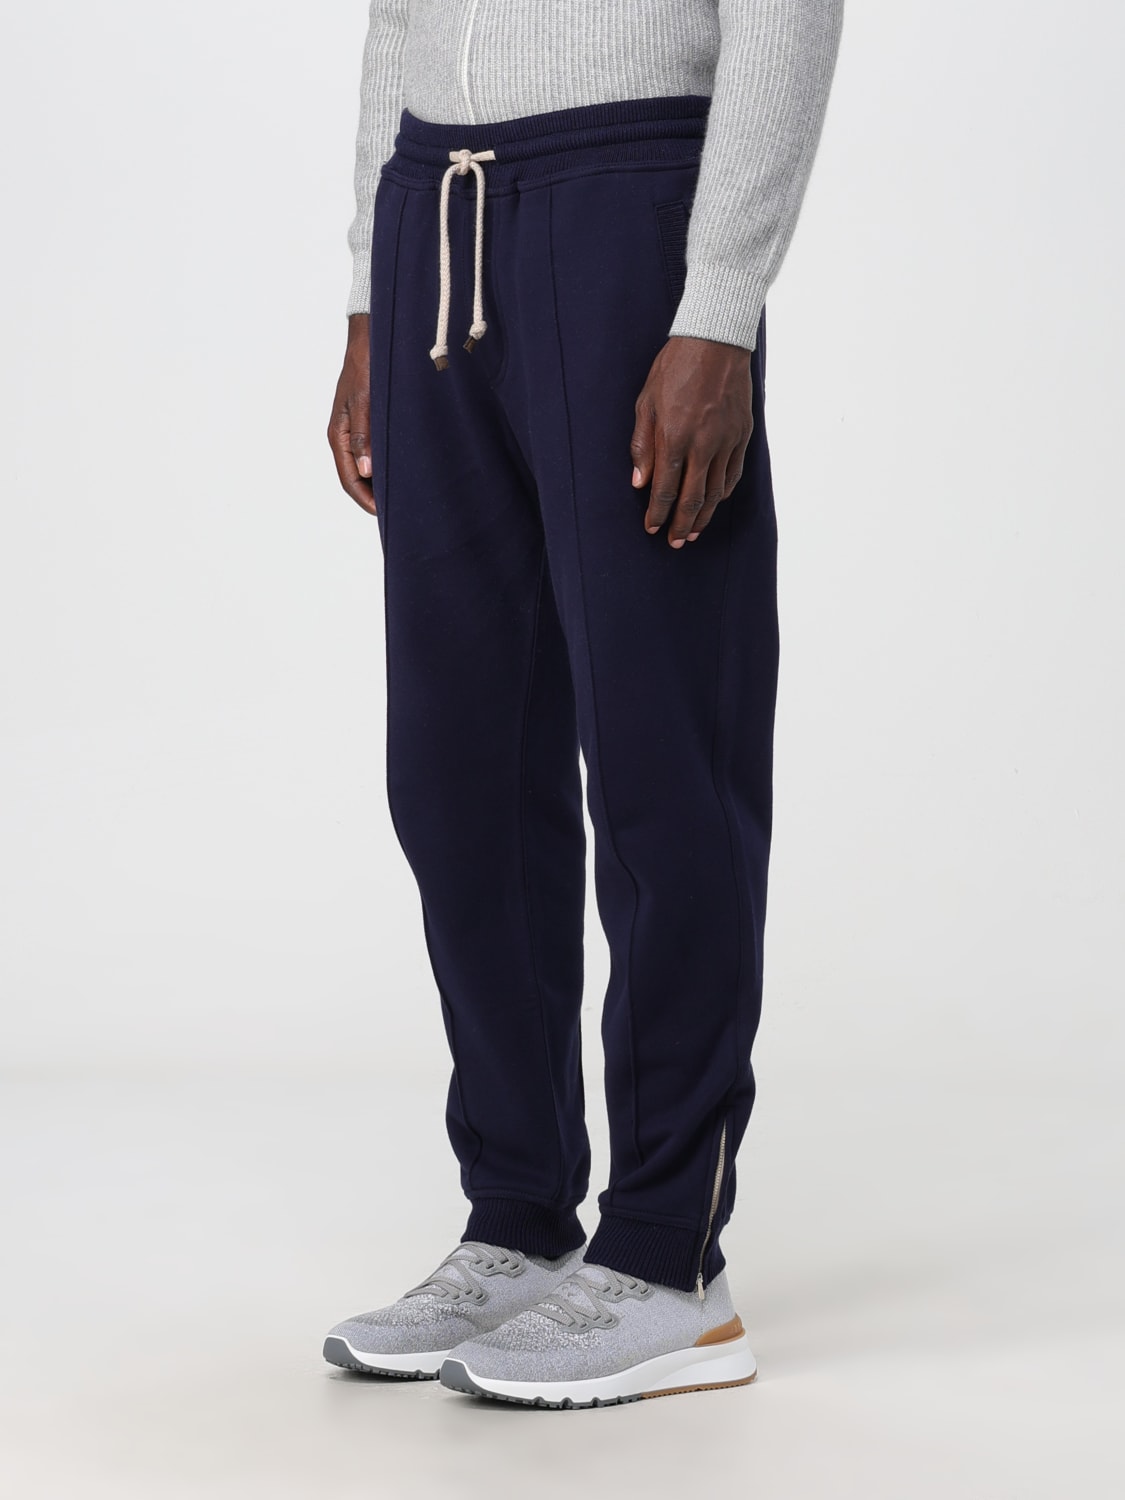 Reigning Champ Midweight Terry Cuffed Sweatpant - Mens